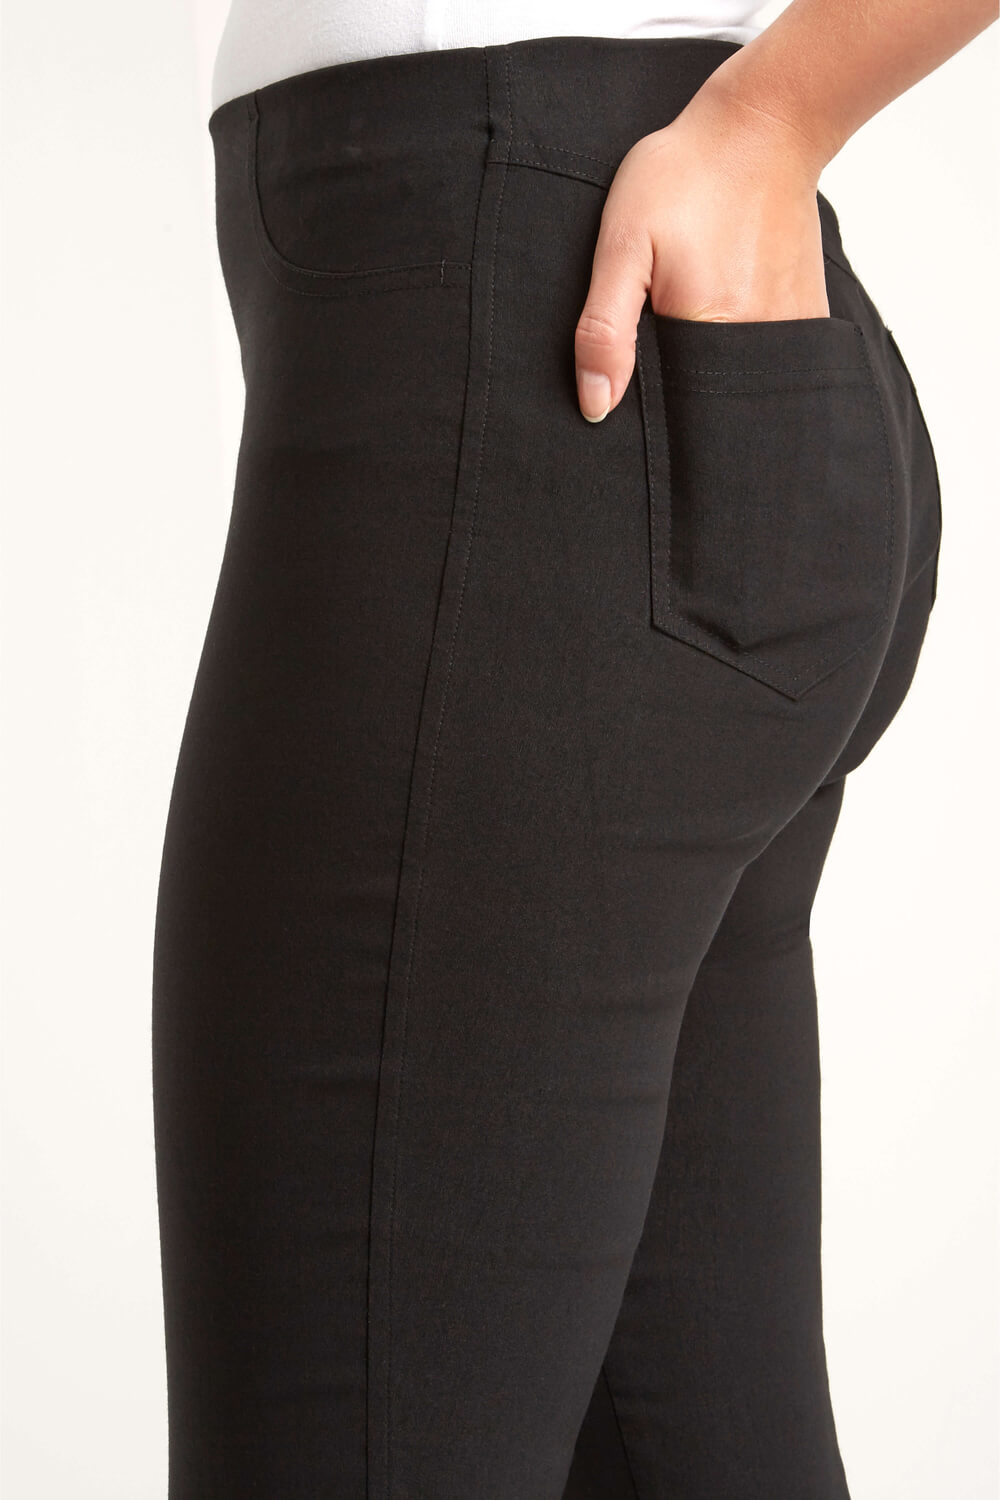 Black 3/4 Length Stretch Trouser, Image 4 of 5